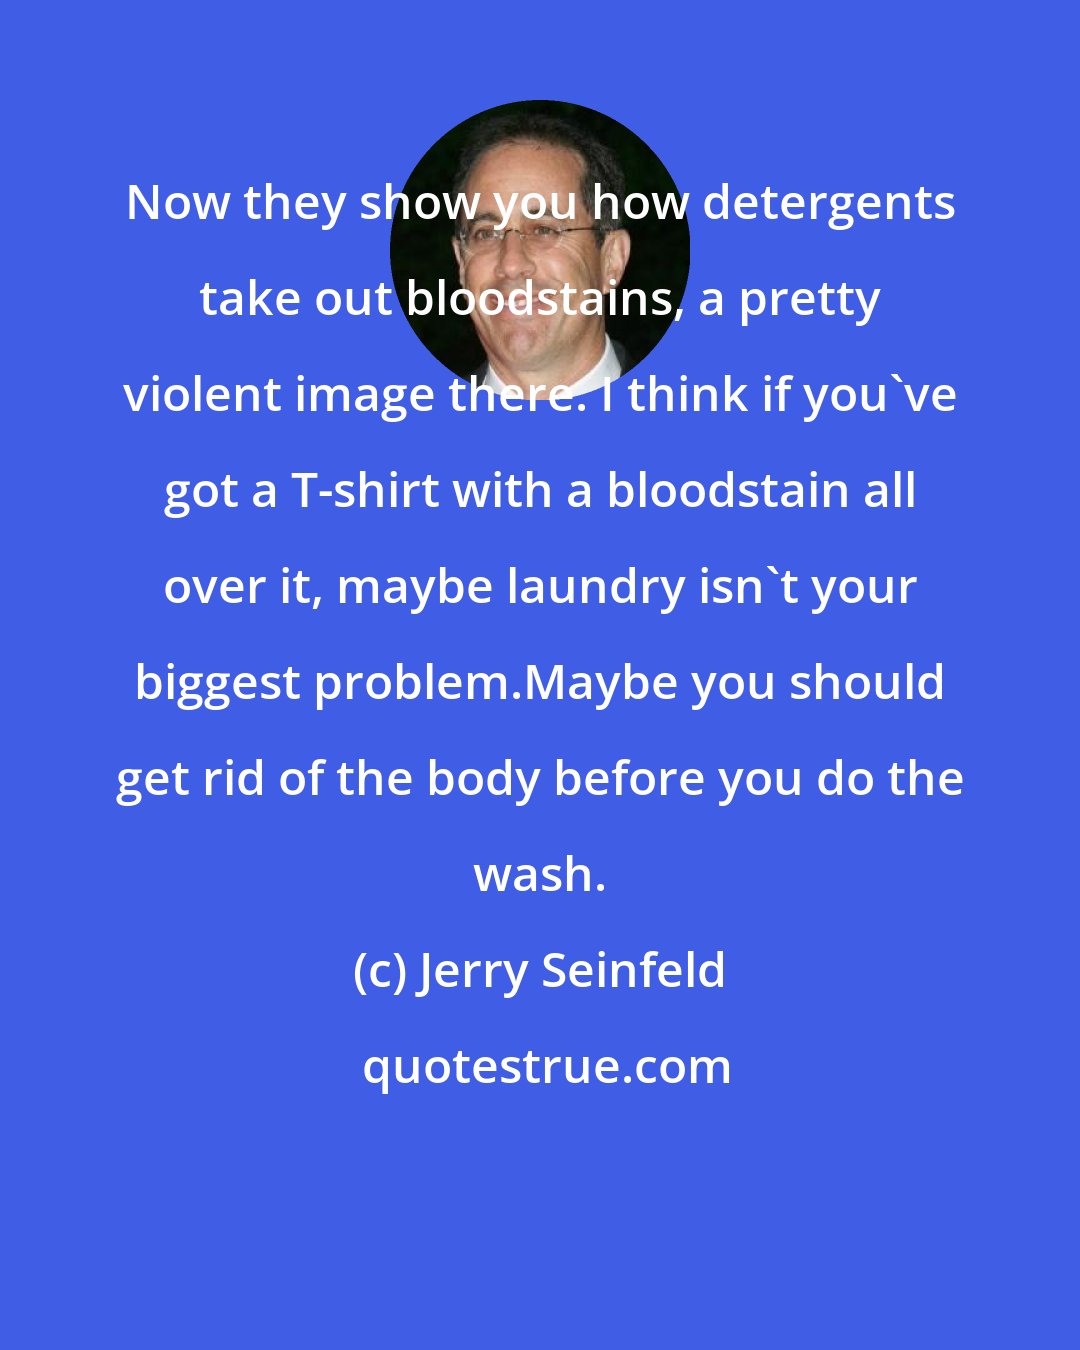 Jerry Seinfeld: Now they show you how detergents take out bloodstains, a pretty violent image there. I think if you've got a T-shirt with a bloodstain all over it, maybe laundry isn't your biggest problem.Maybe you should get rid of the body before you do the wash.